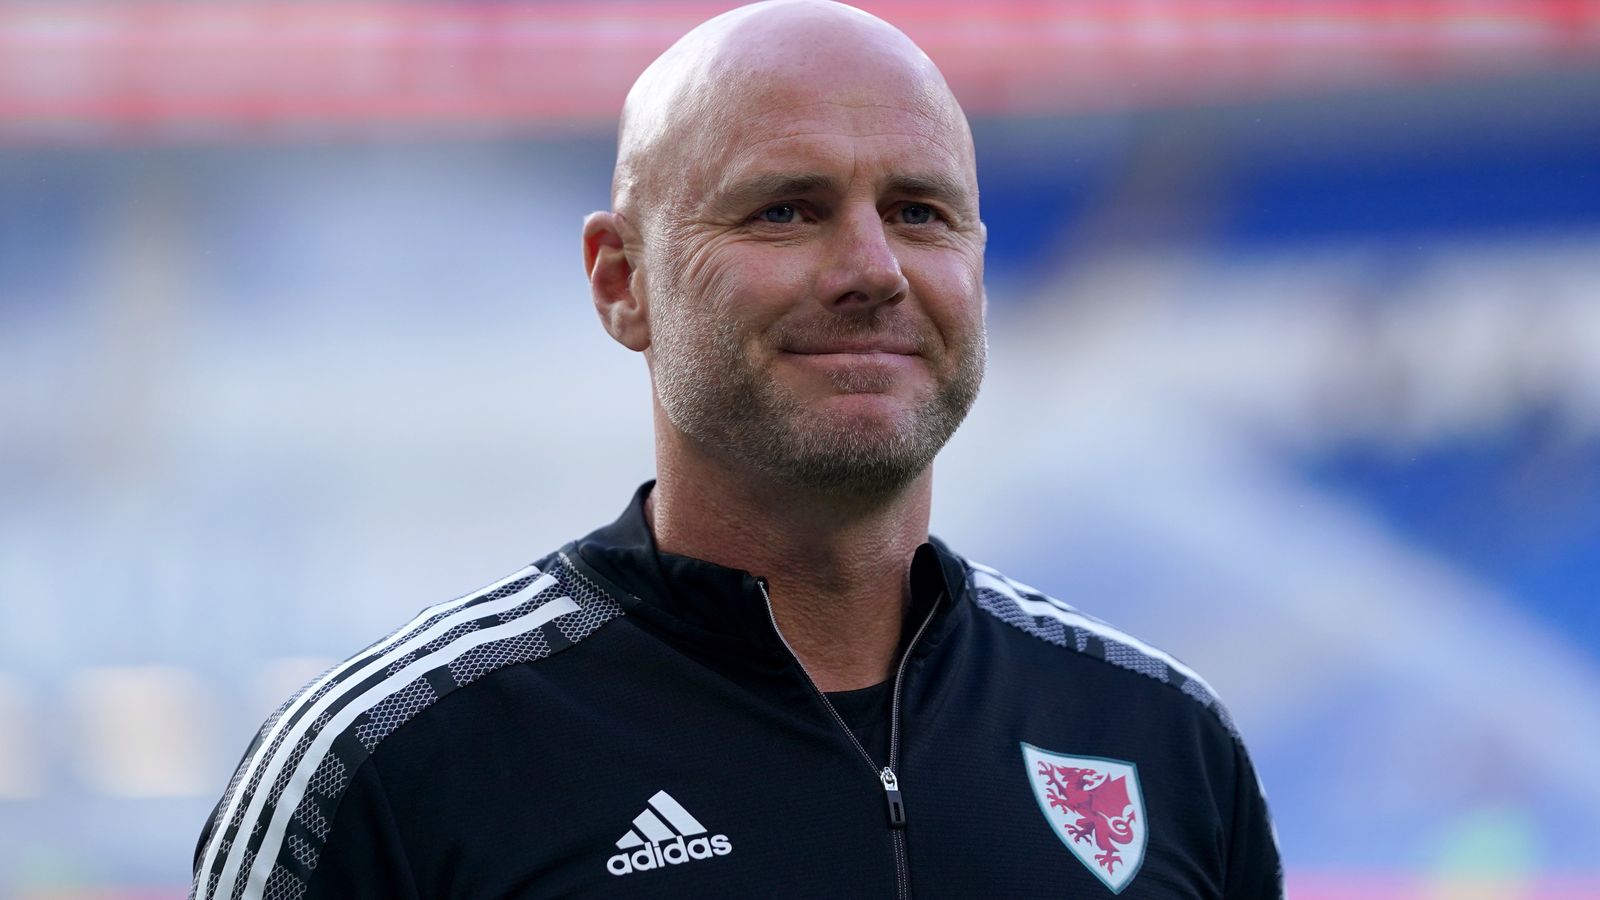 Qatar 2022: Wales Manager, Rob Page Signs New Deal